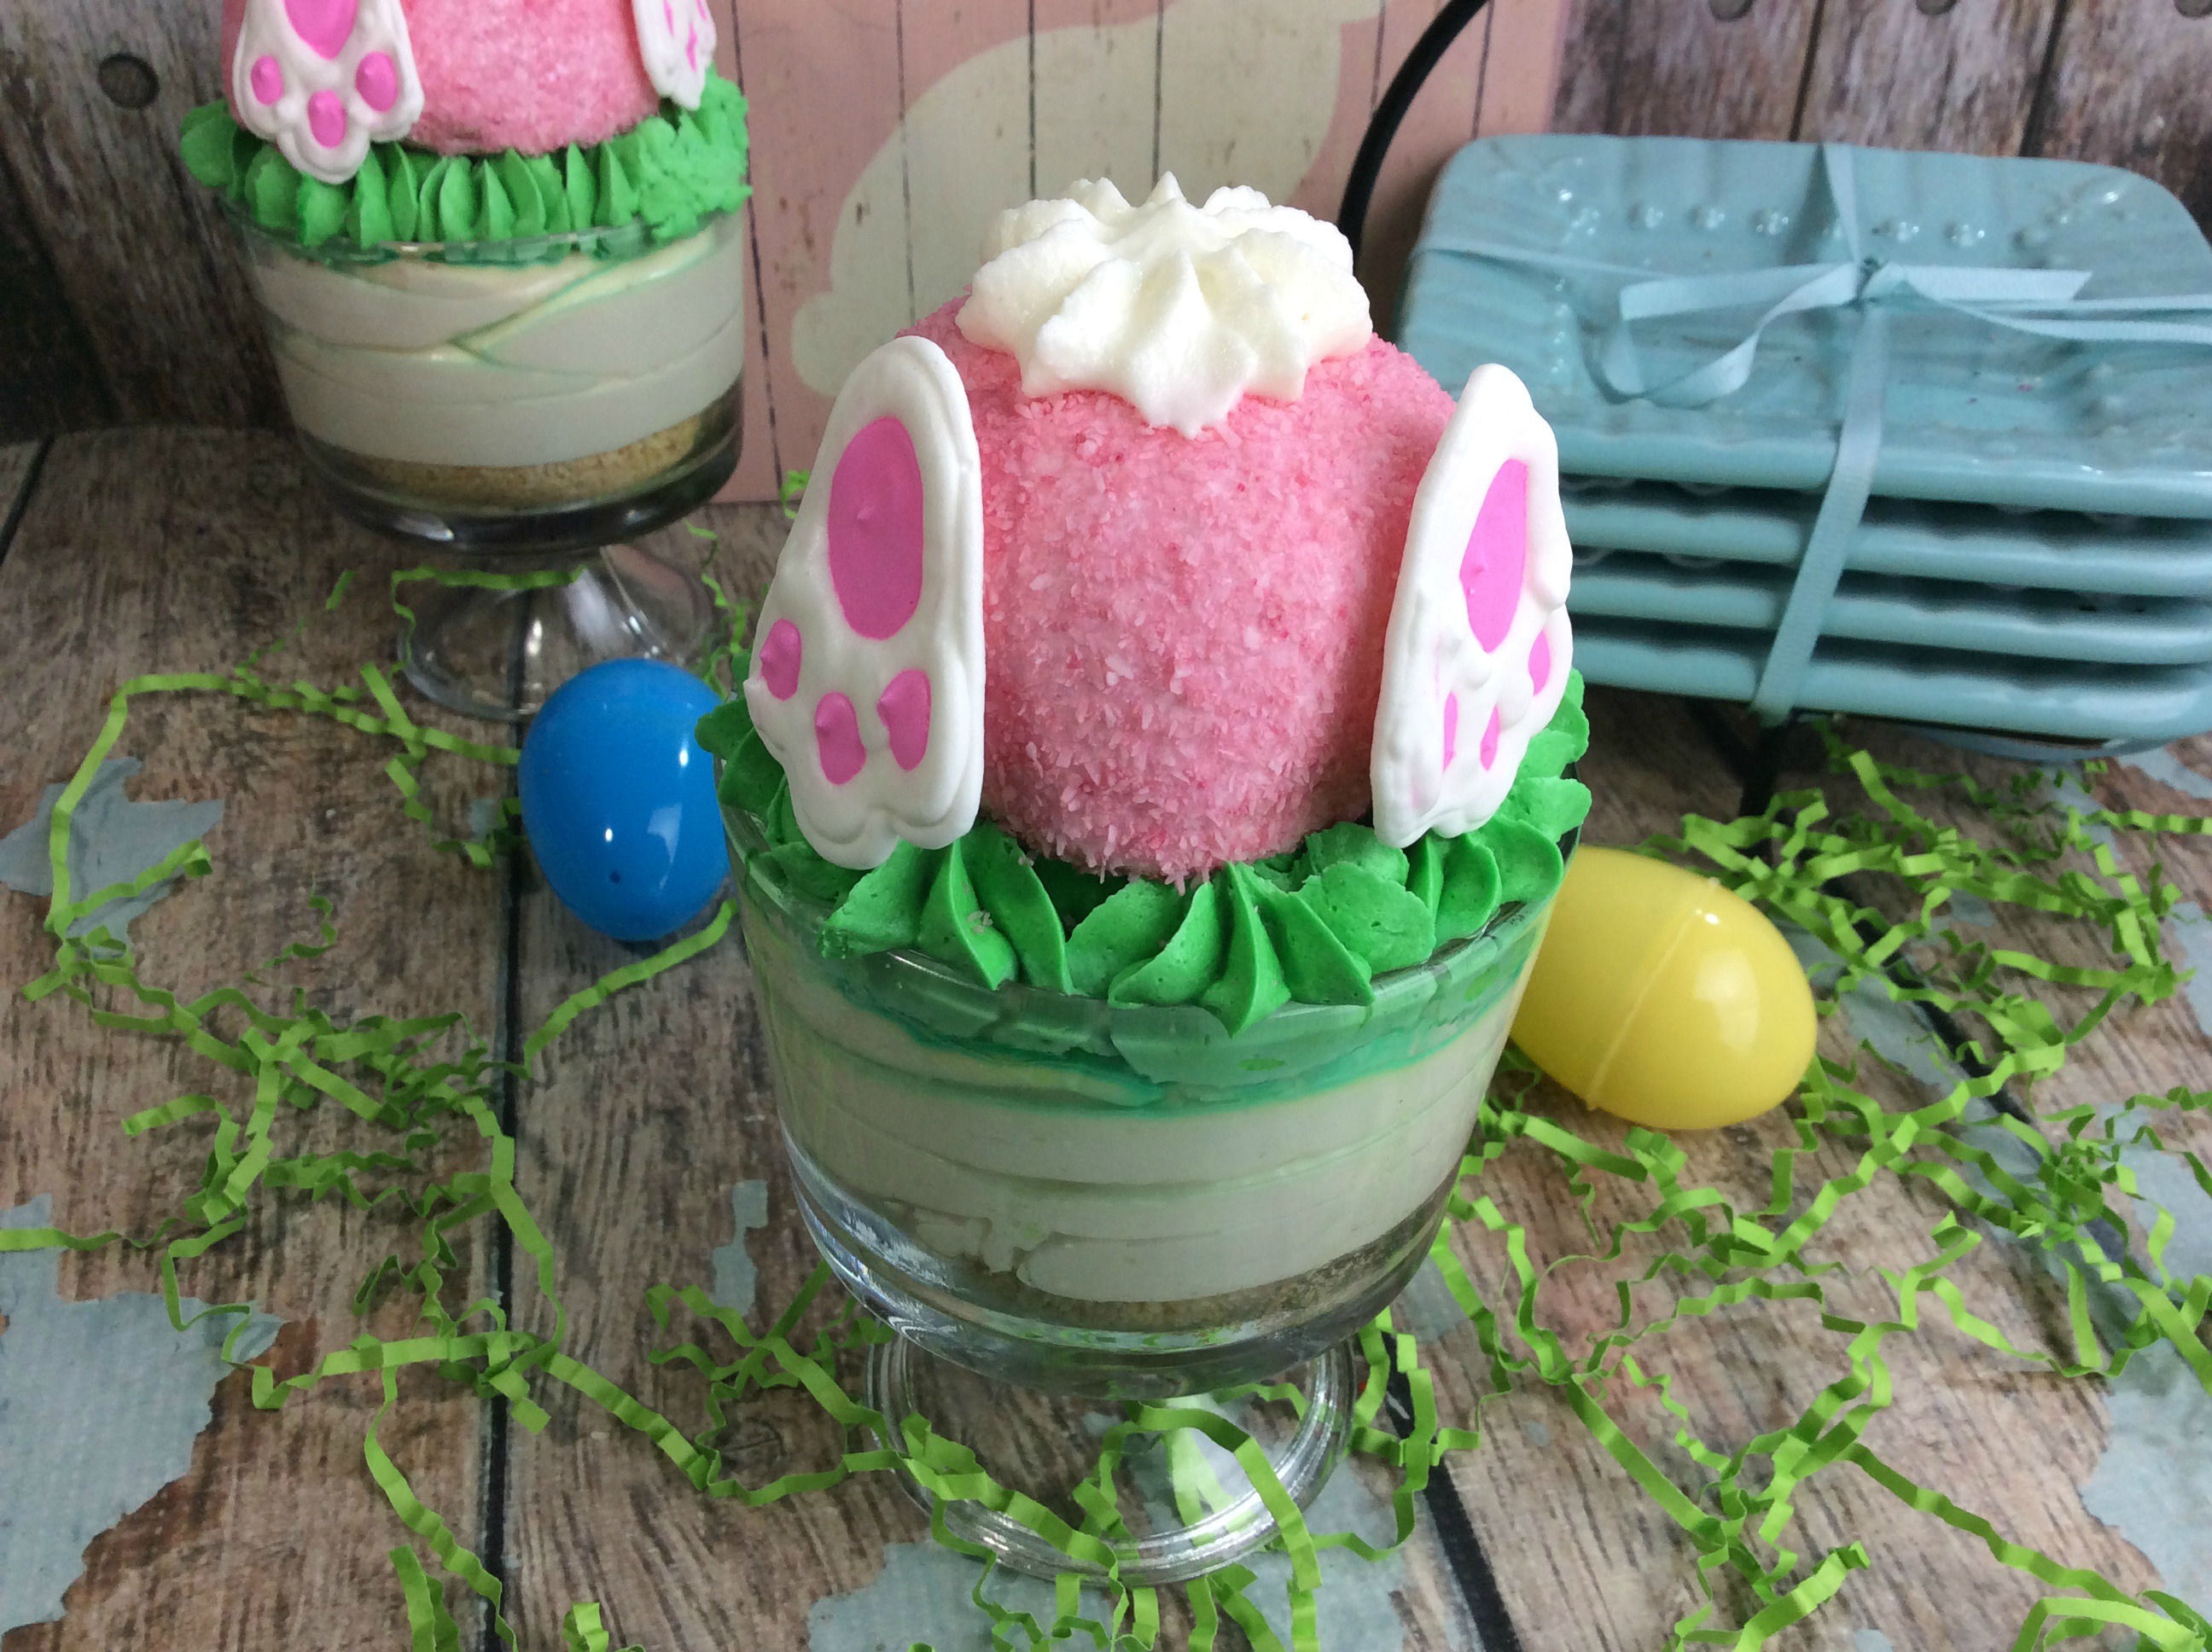 Do you love cheesecake and want to create a special Easter dessert? How about Bunny Butt cheesecake? It is delicious and easy to make.